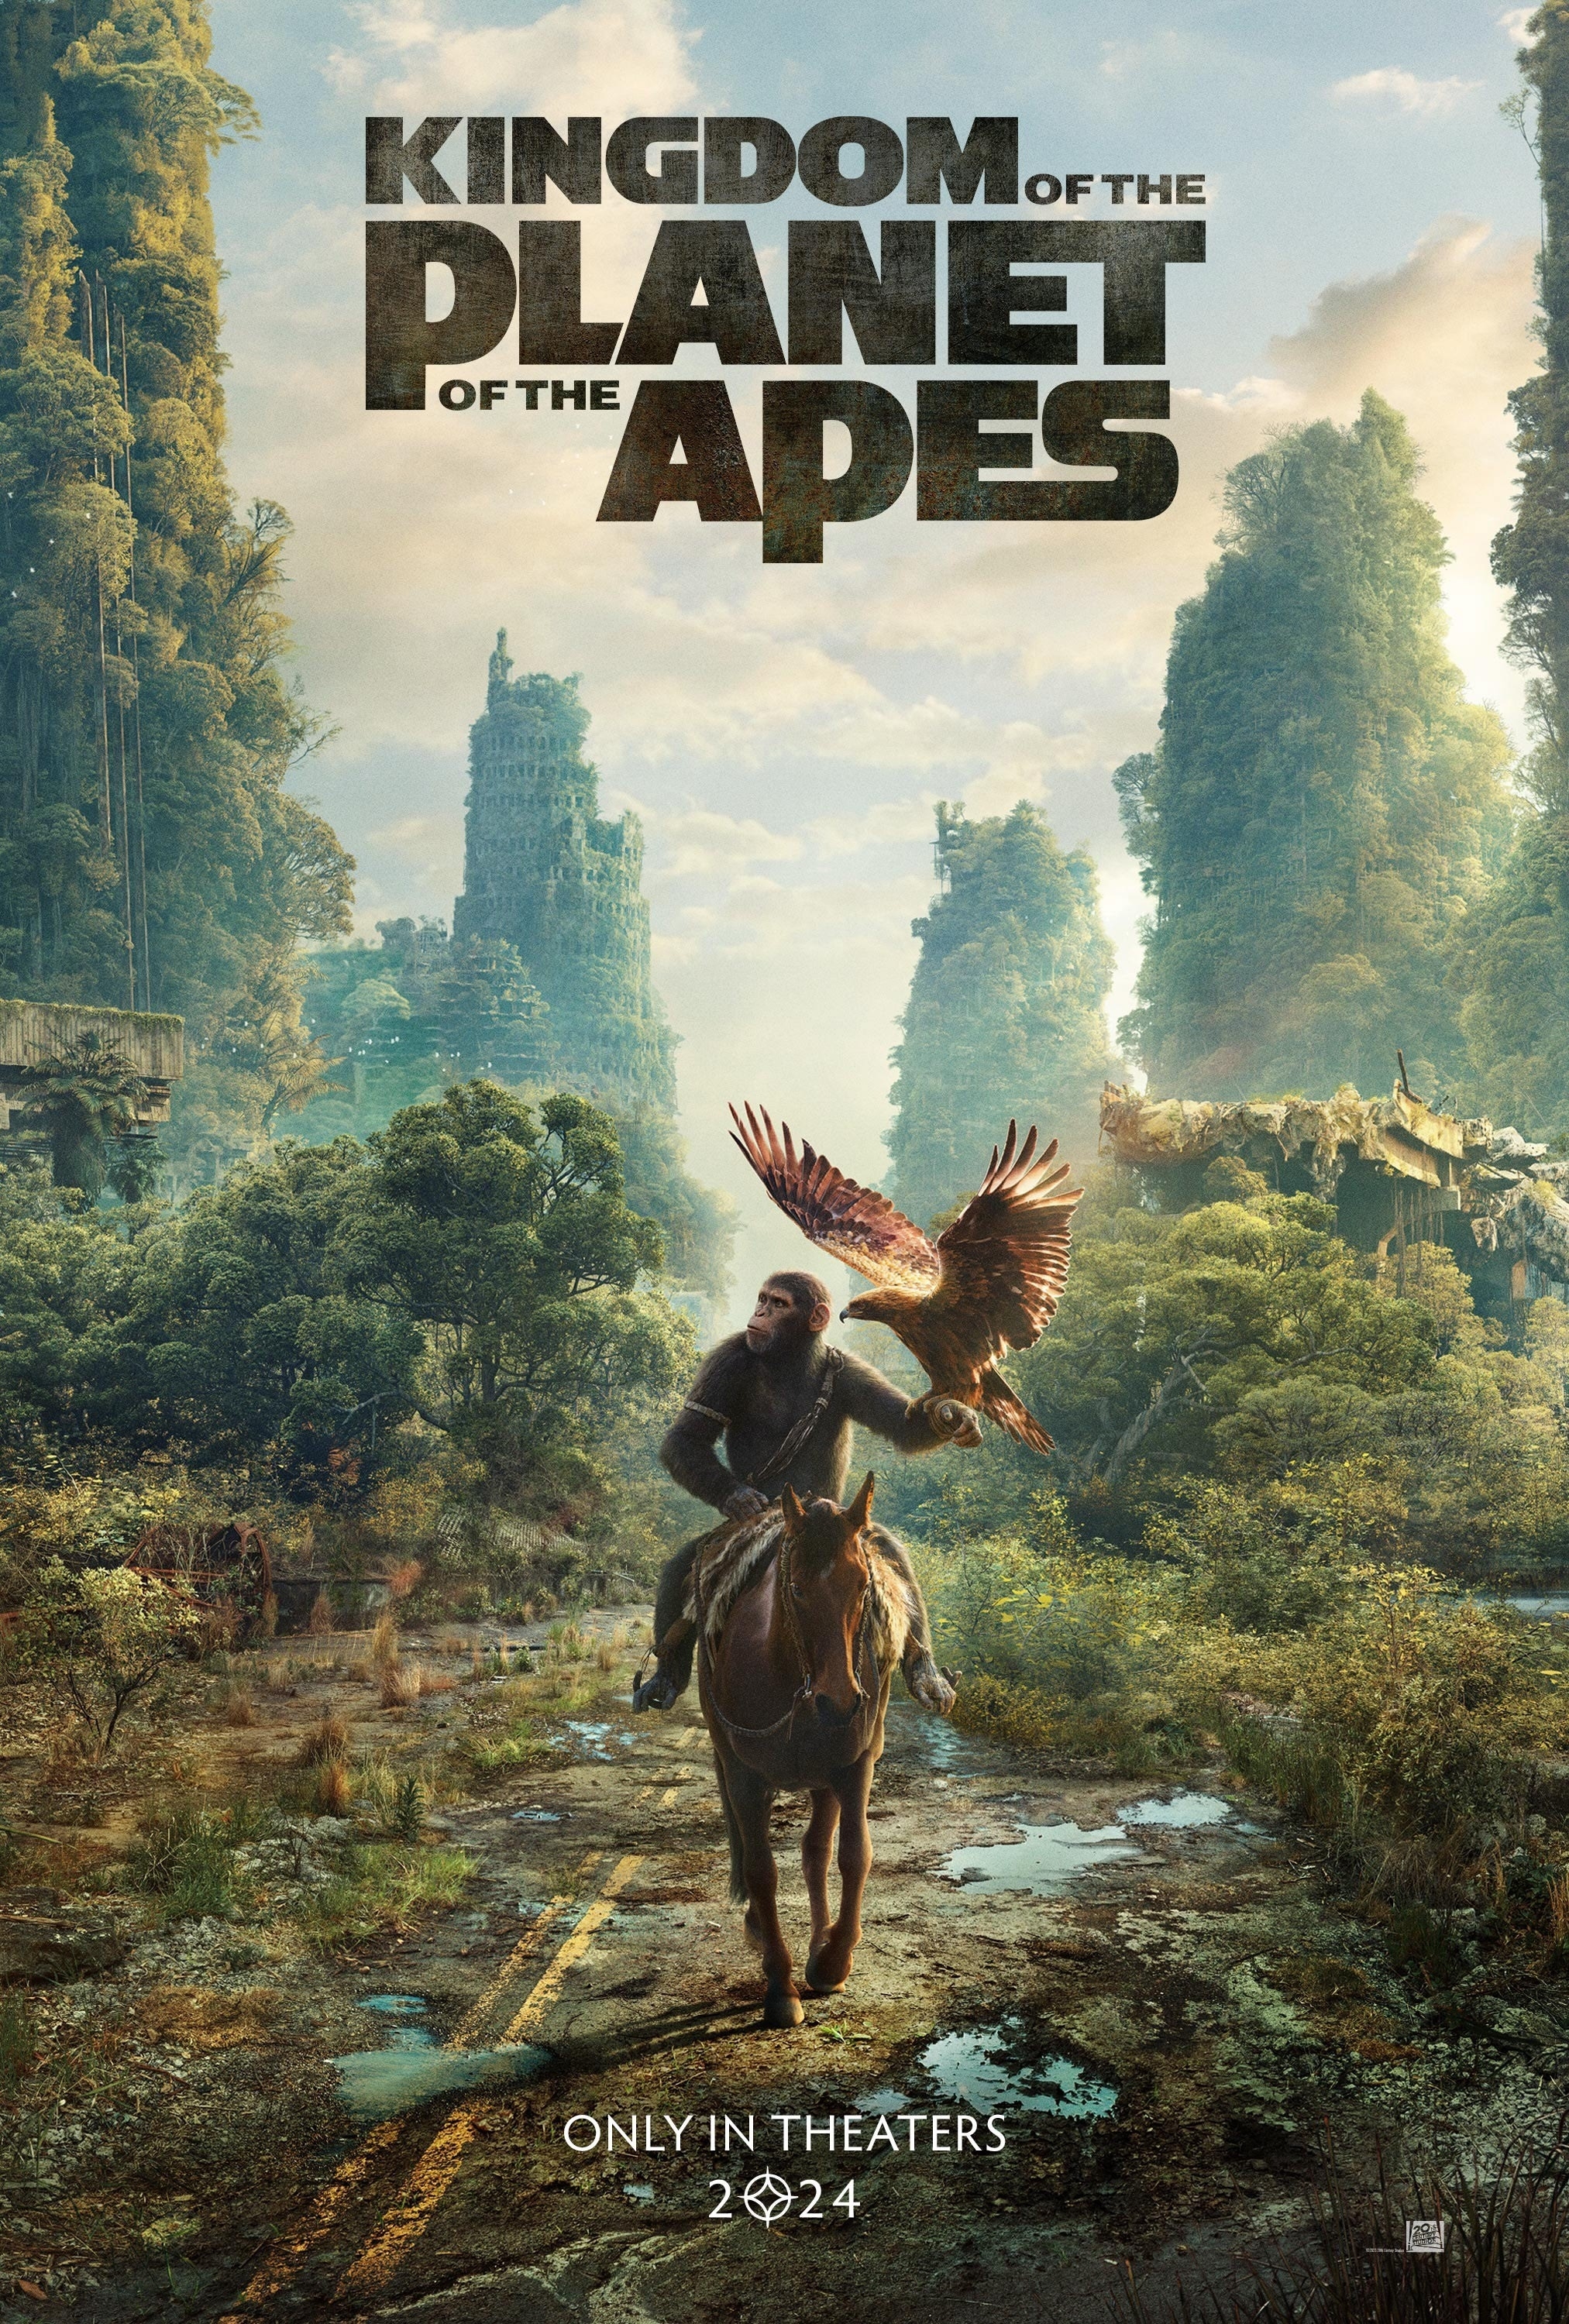 &quot;Poster for &#x27;Kingdom of the Planet of the Apes&#x27; showing a character on horseback with an eagle, in a lush, post-apocalyptic landscape.&quot;